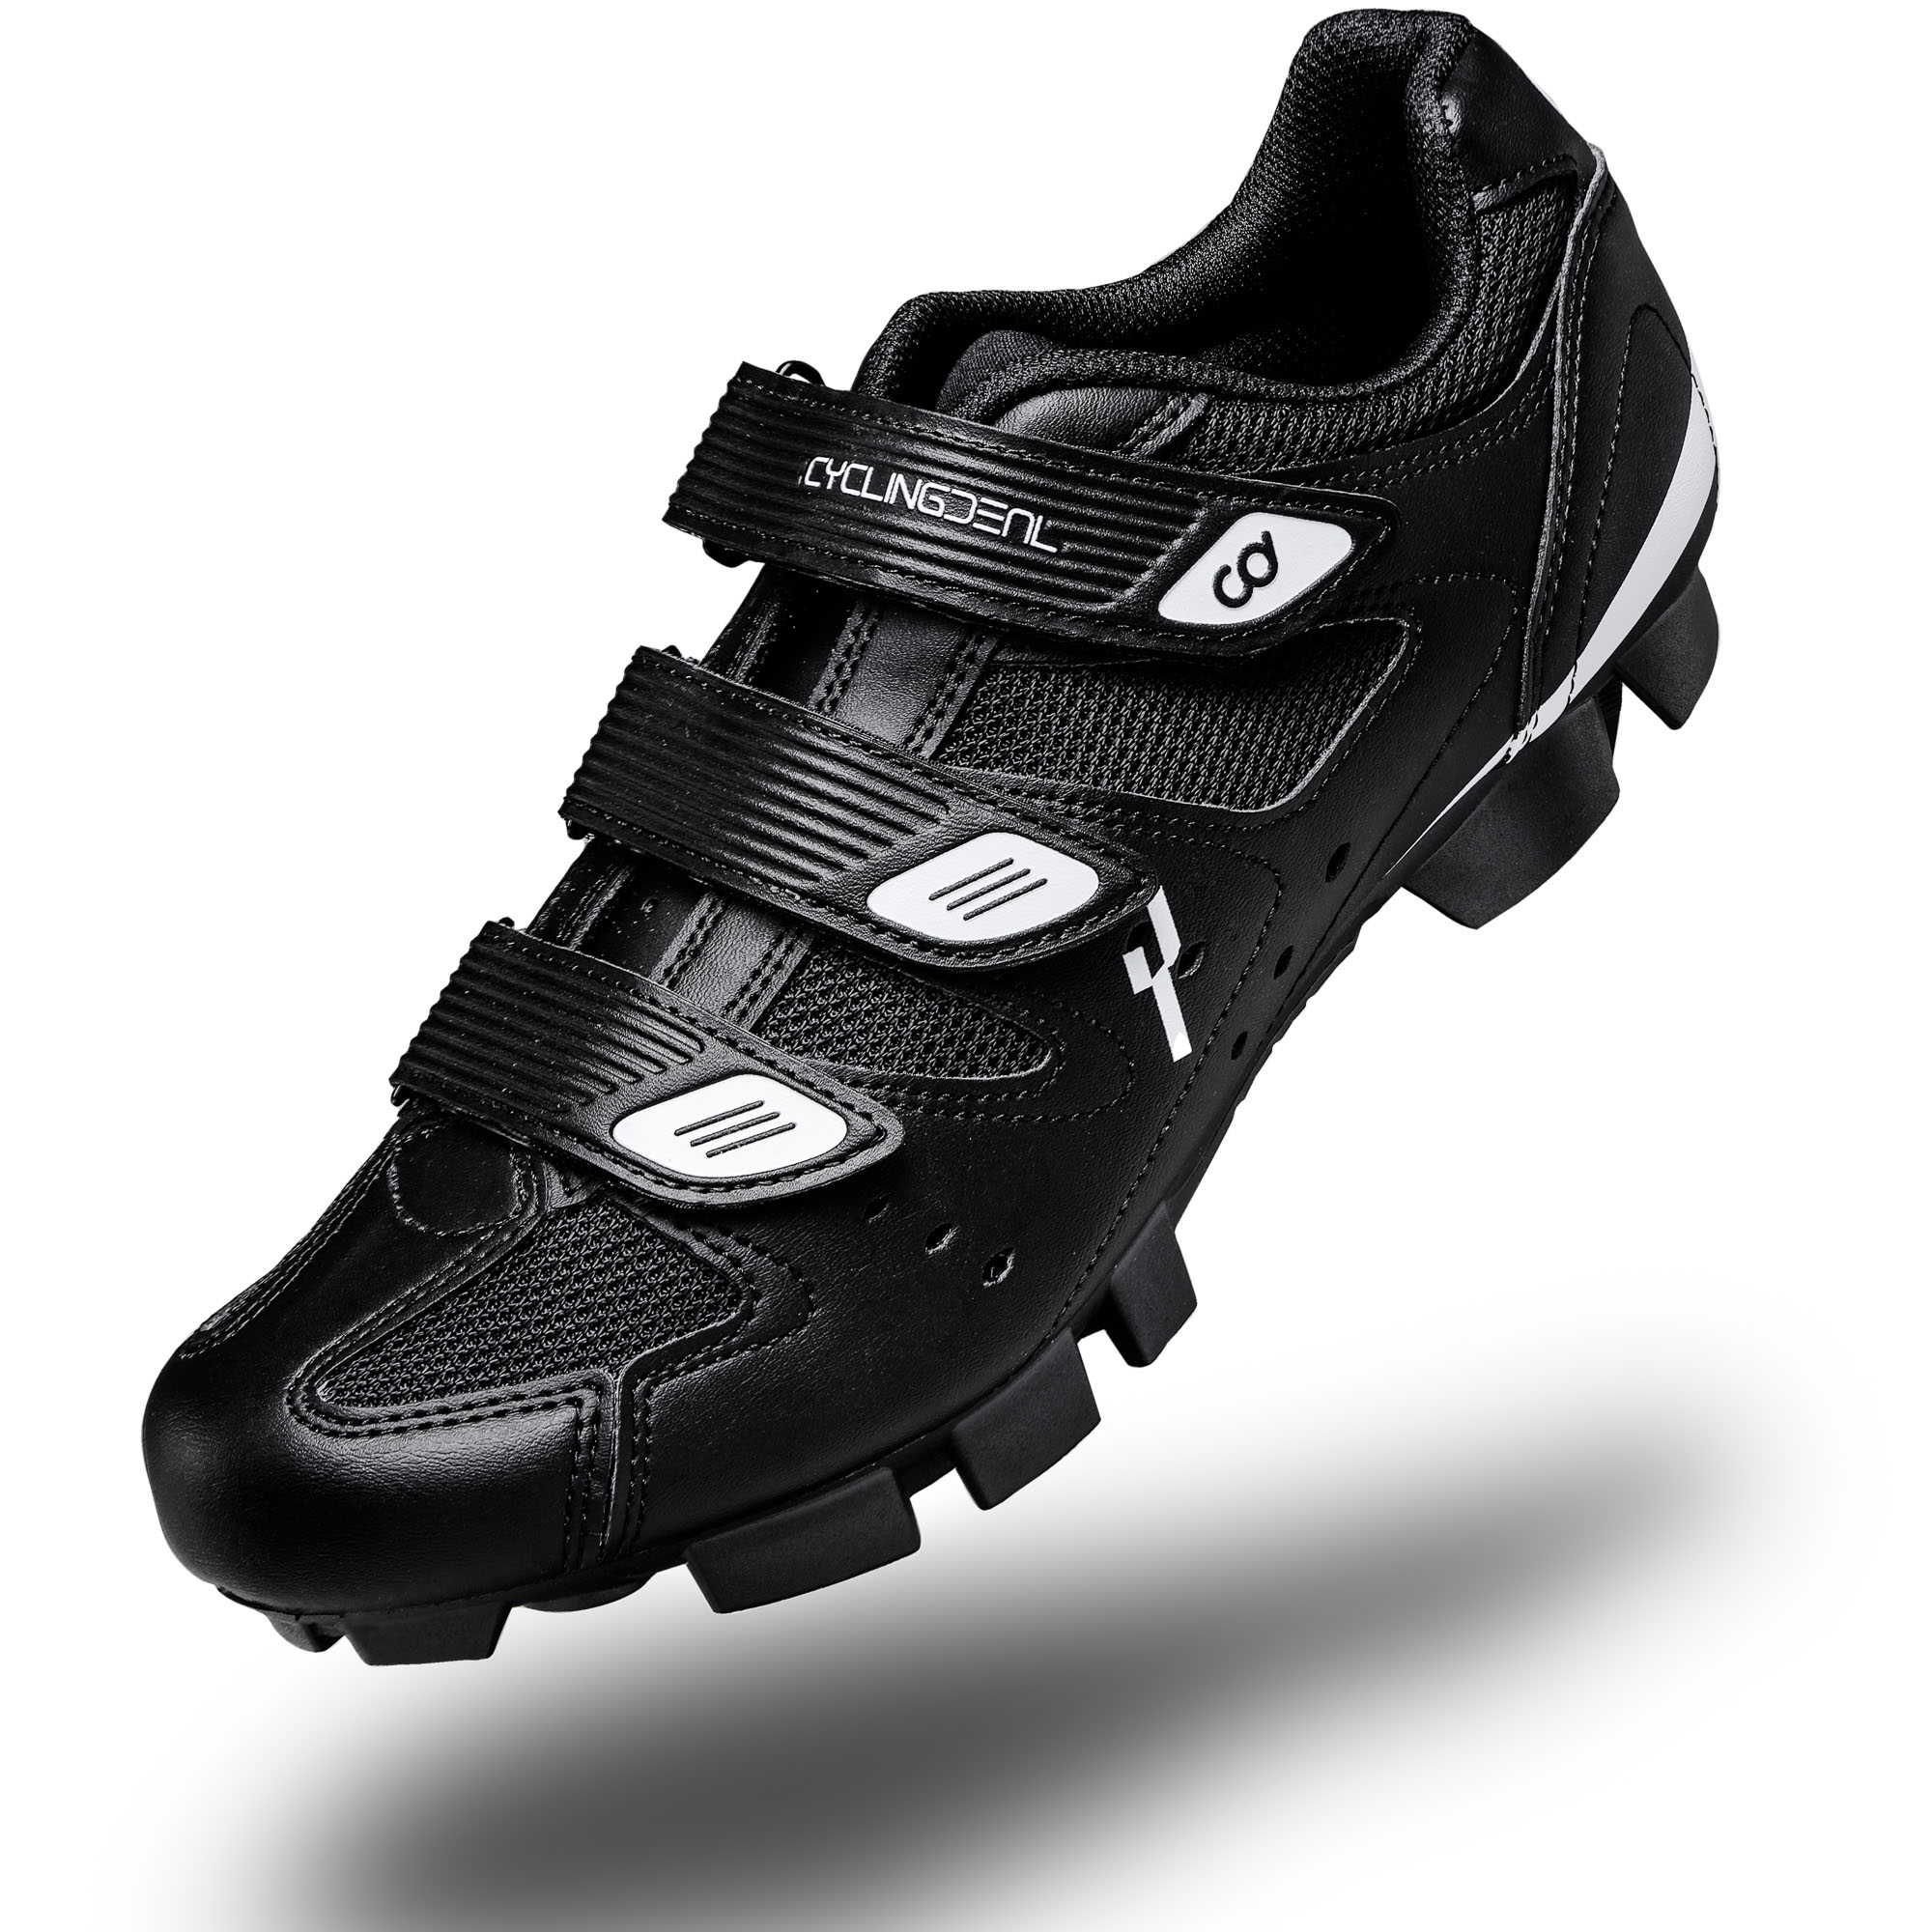 CyclingDeal Mountain Bicycle Bike Men's MTB Cycling Shoes Black Compatible with SHIMANO SPD and CrankBrothers Cleats | Size 44